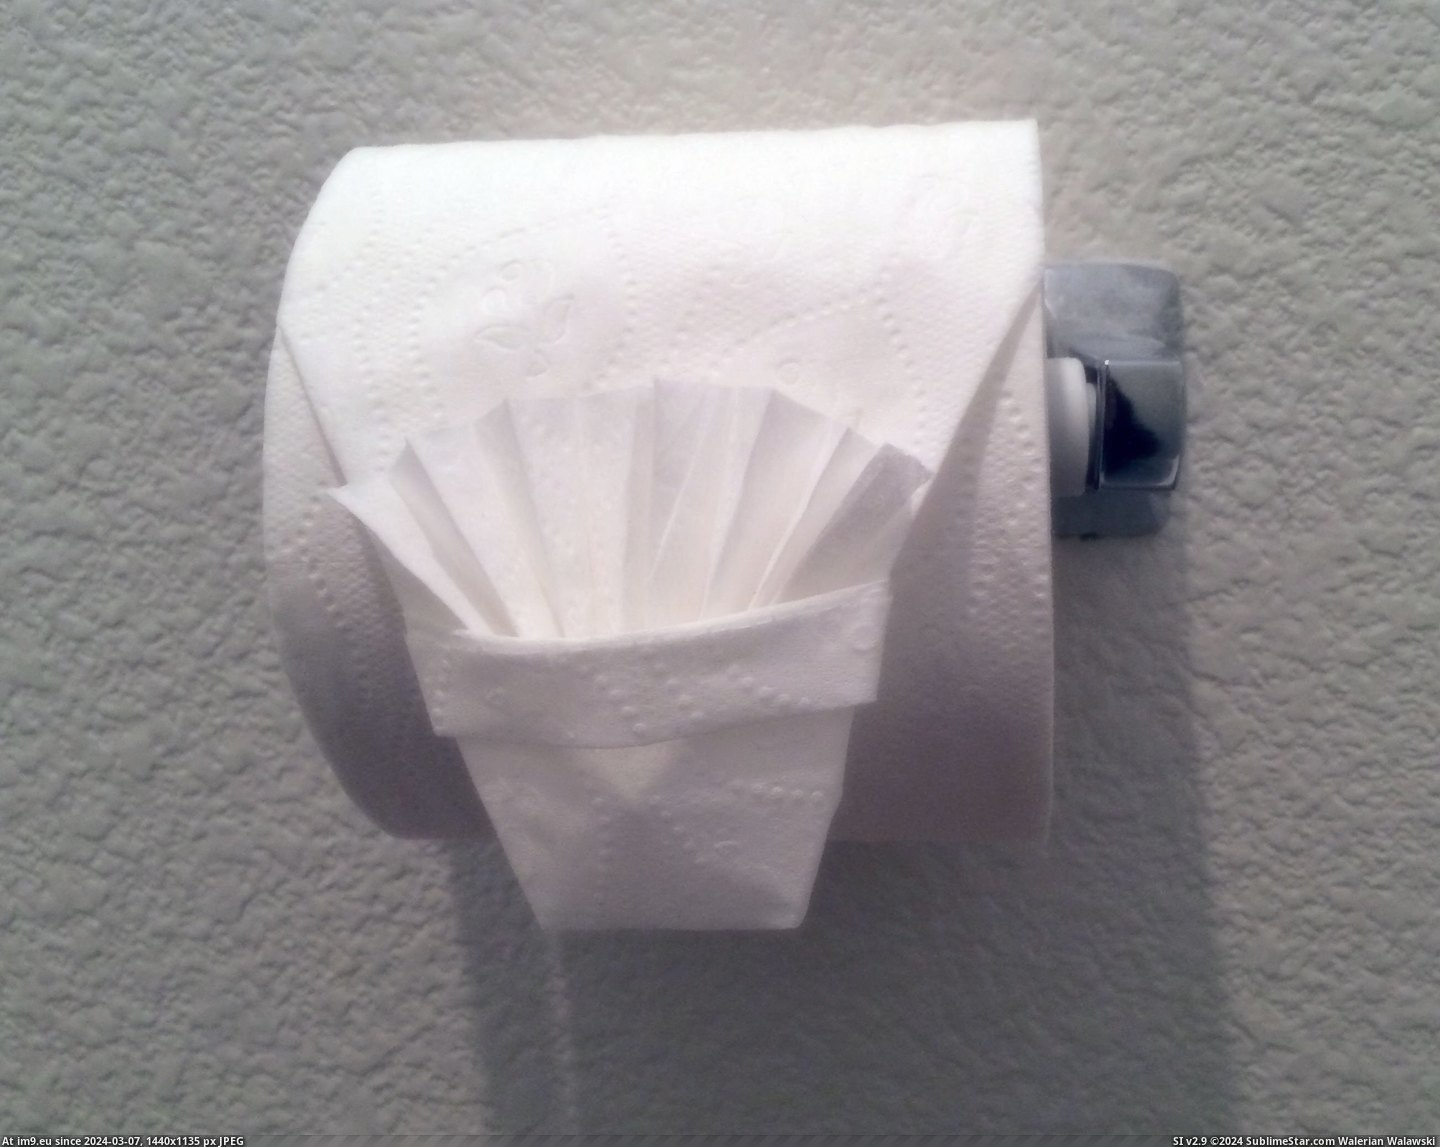 #Funny #Big #Fancy #Kidding #Parties #Origami #Ing #Houses #Guests [Funny] Whenever I go to parties at big fancy houses, I origami the TP so other guests are like 'Are you f-ing kidding me?' Pic. (Bild von album My r/FUNNY favs))